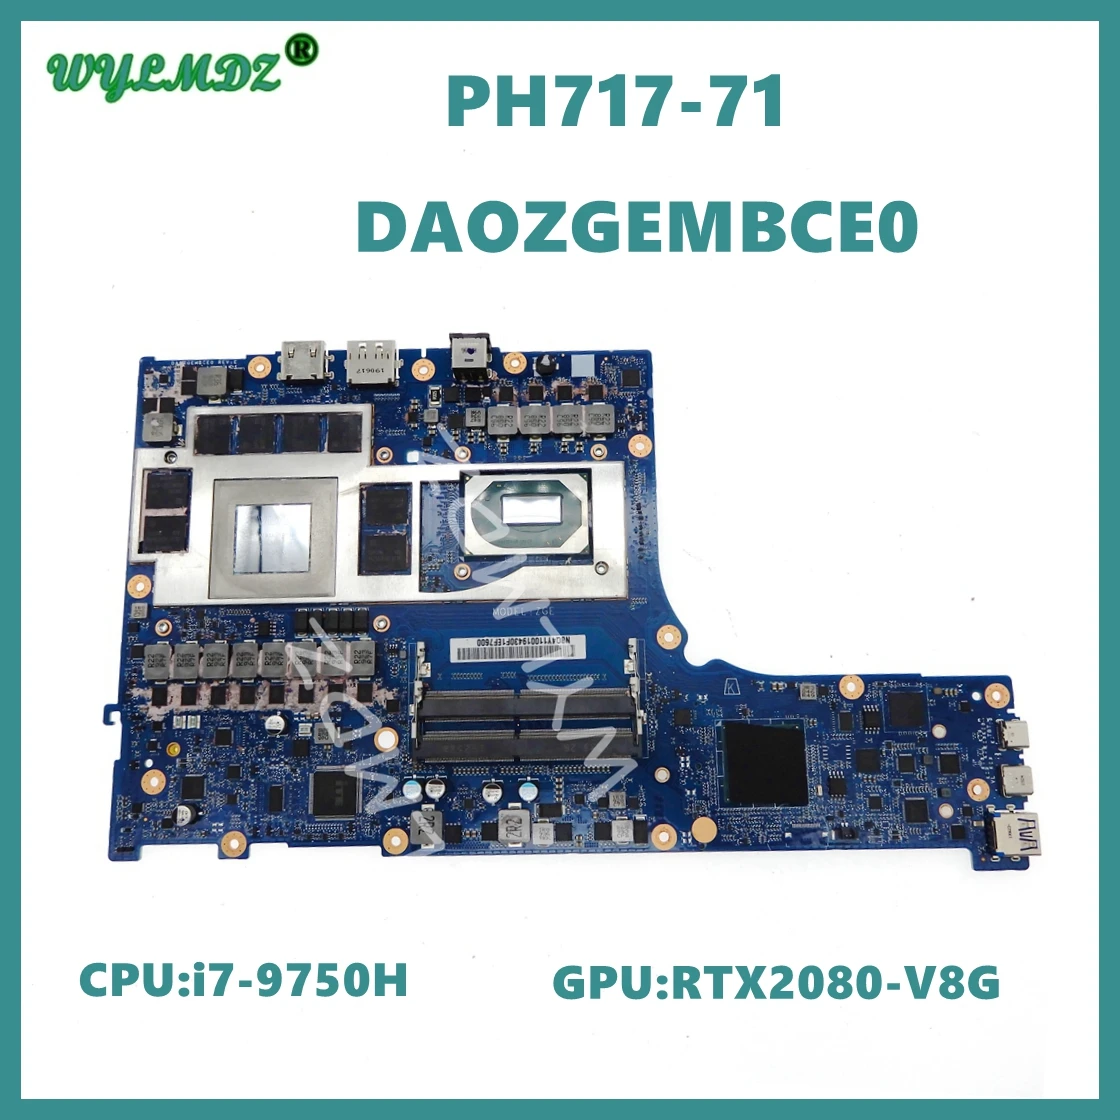 

DA0ZGEMBCE0 With i7-9750H CPU RTX2080-V8G GPU Mainboard For Acer Predator Helios 700 PH717-71 Laptop Motherboard 100% Tested